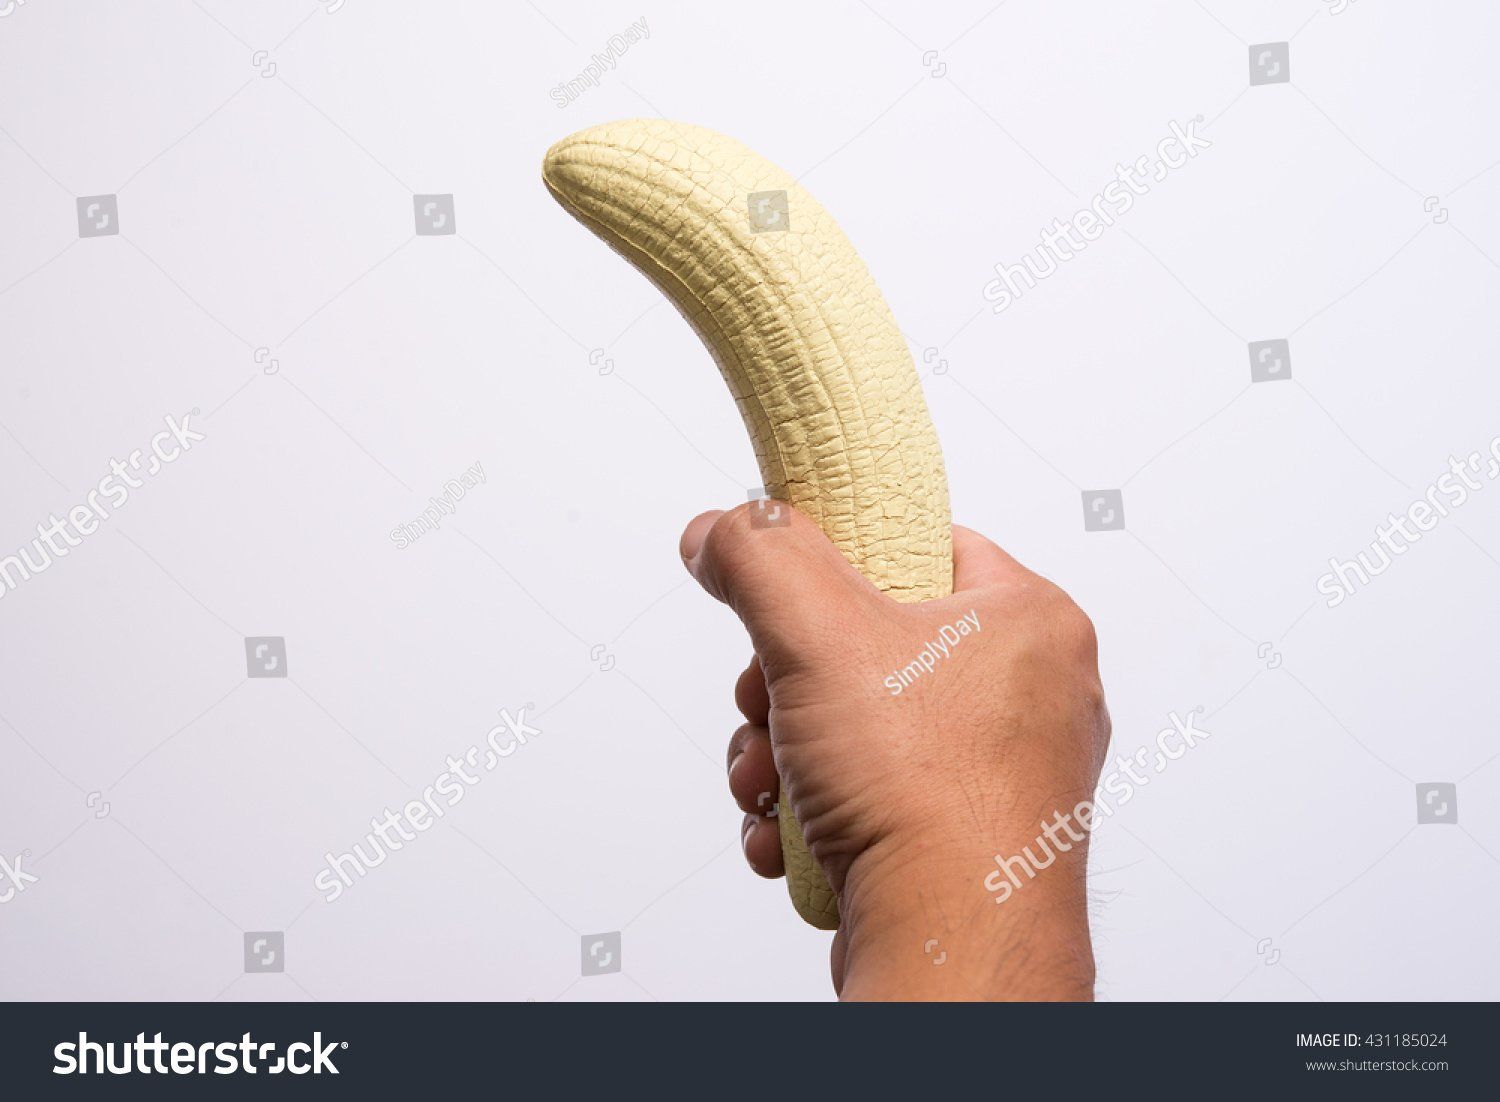 best of Penis in hand Holding